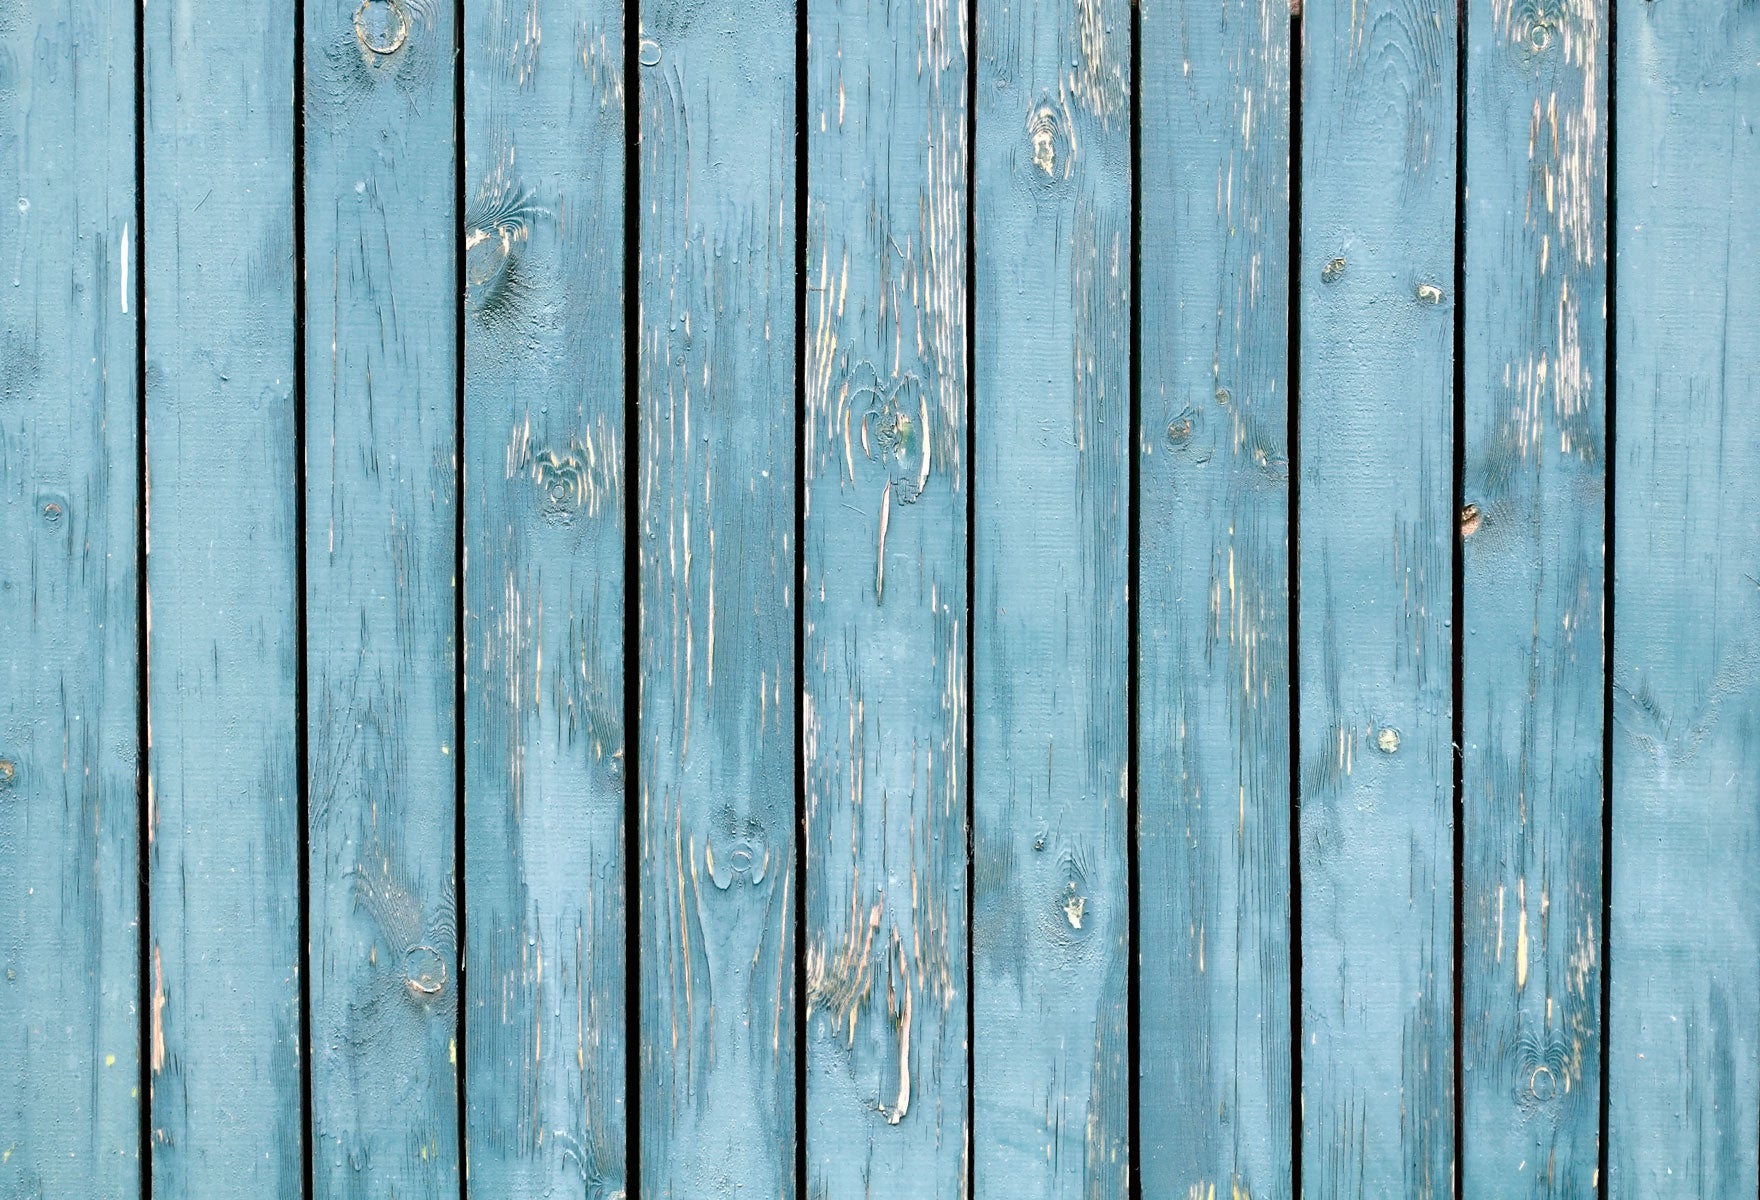 Kate Distressed Blue Wooden Floor Backdrop for Photography